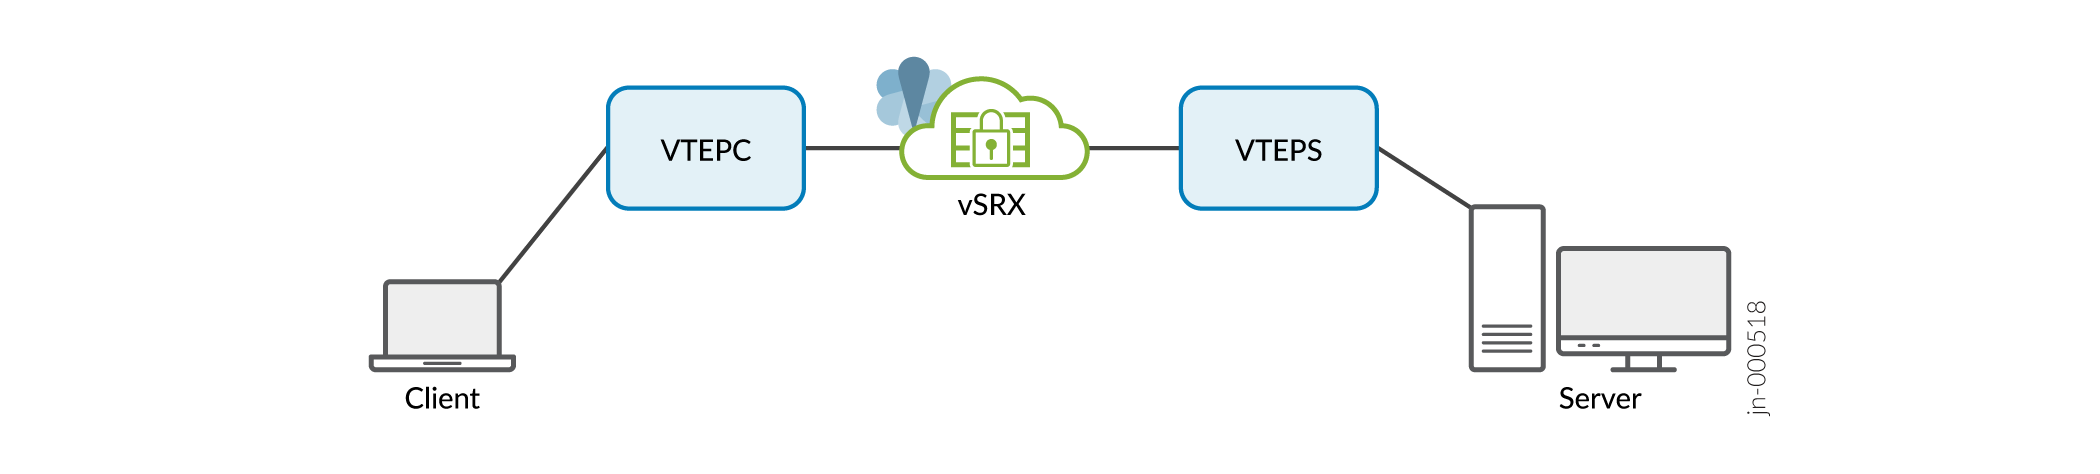 Simplified Topology of vSRX Virtual Firewall 3.0 as Transit Router